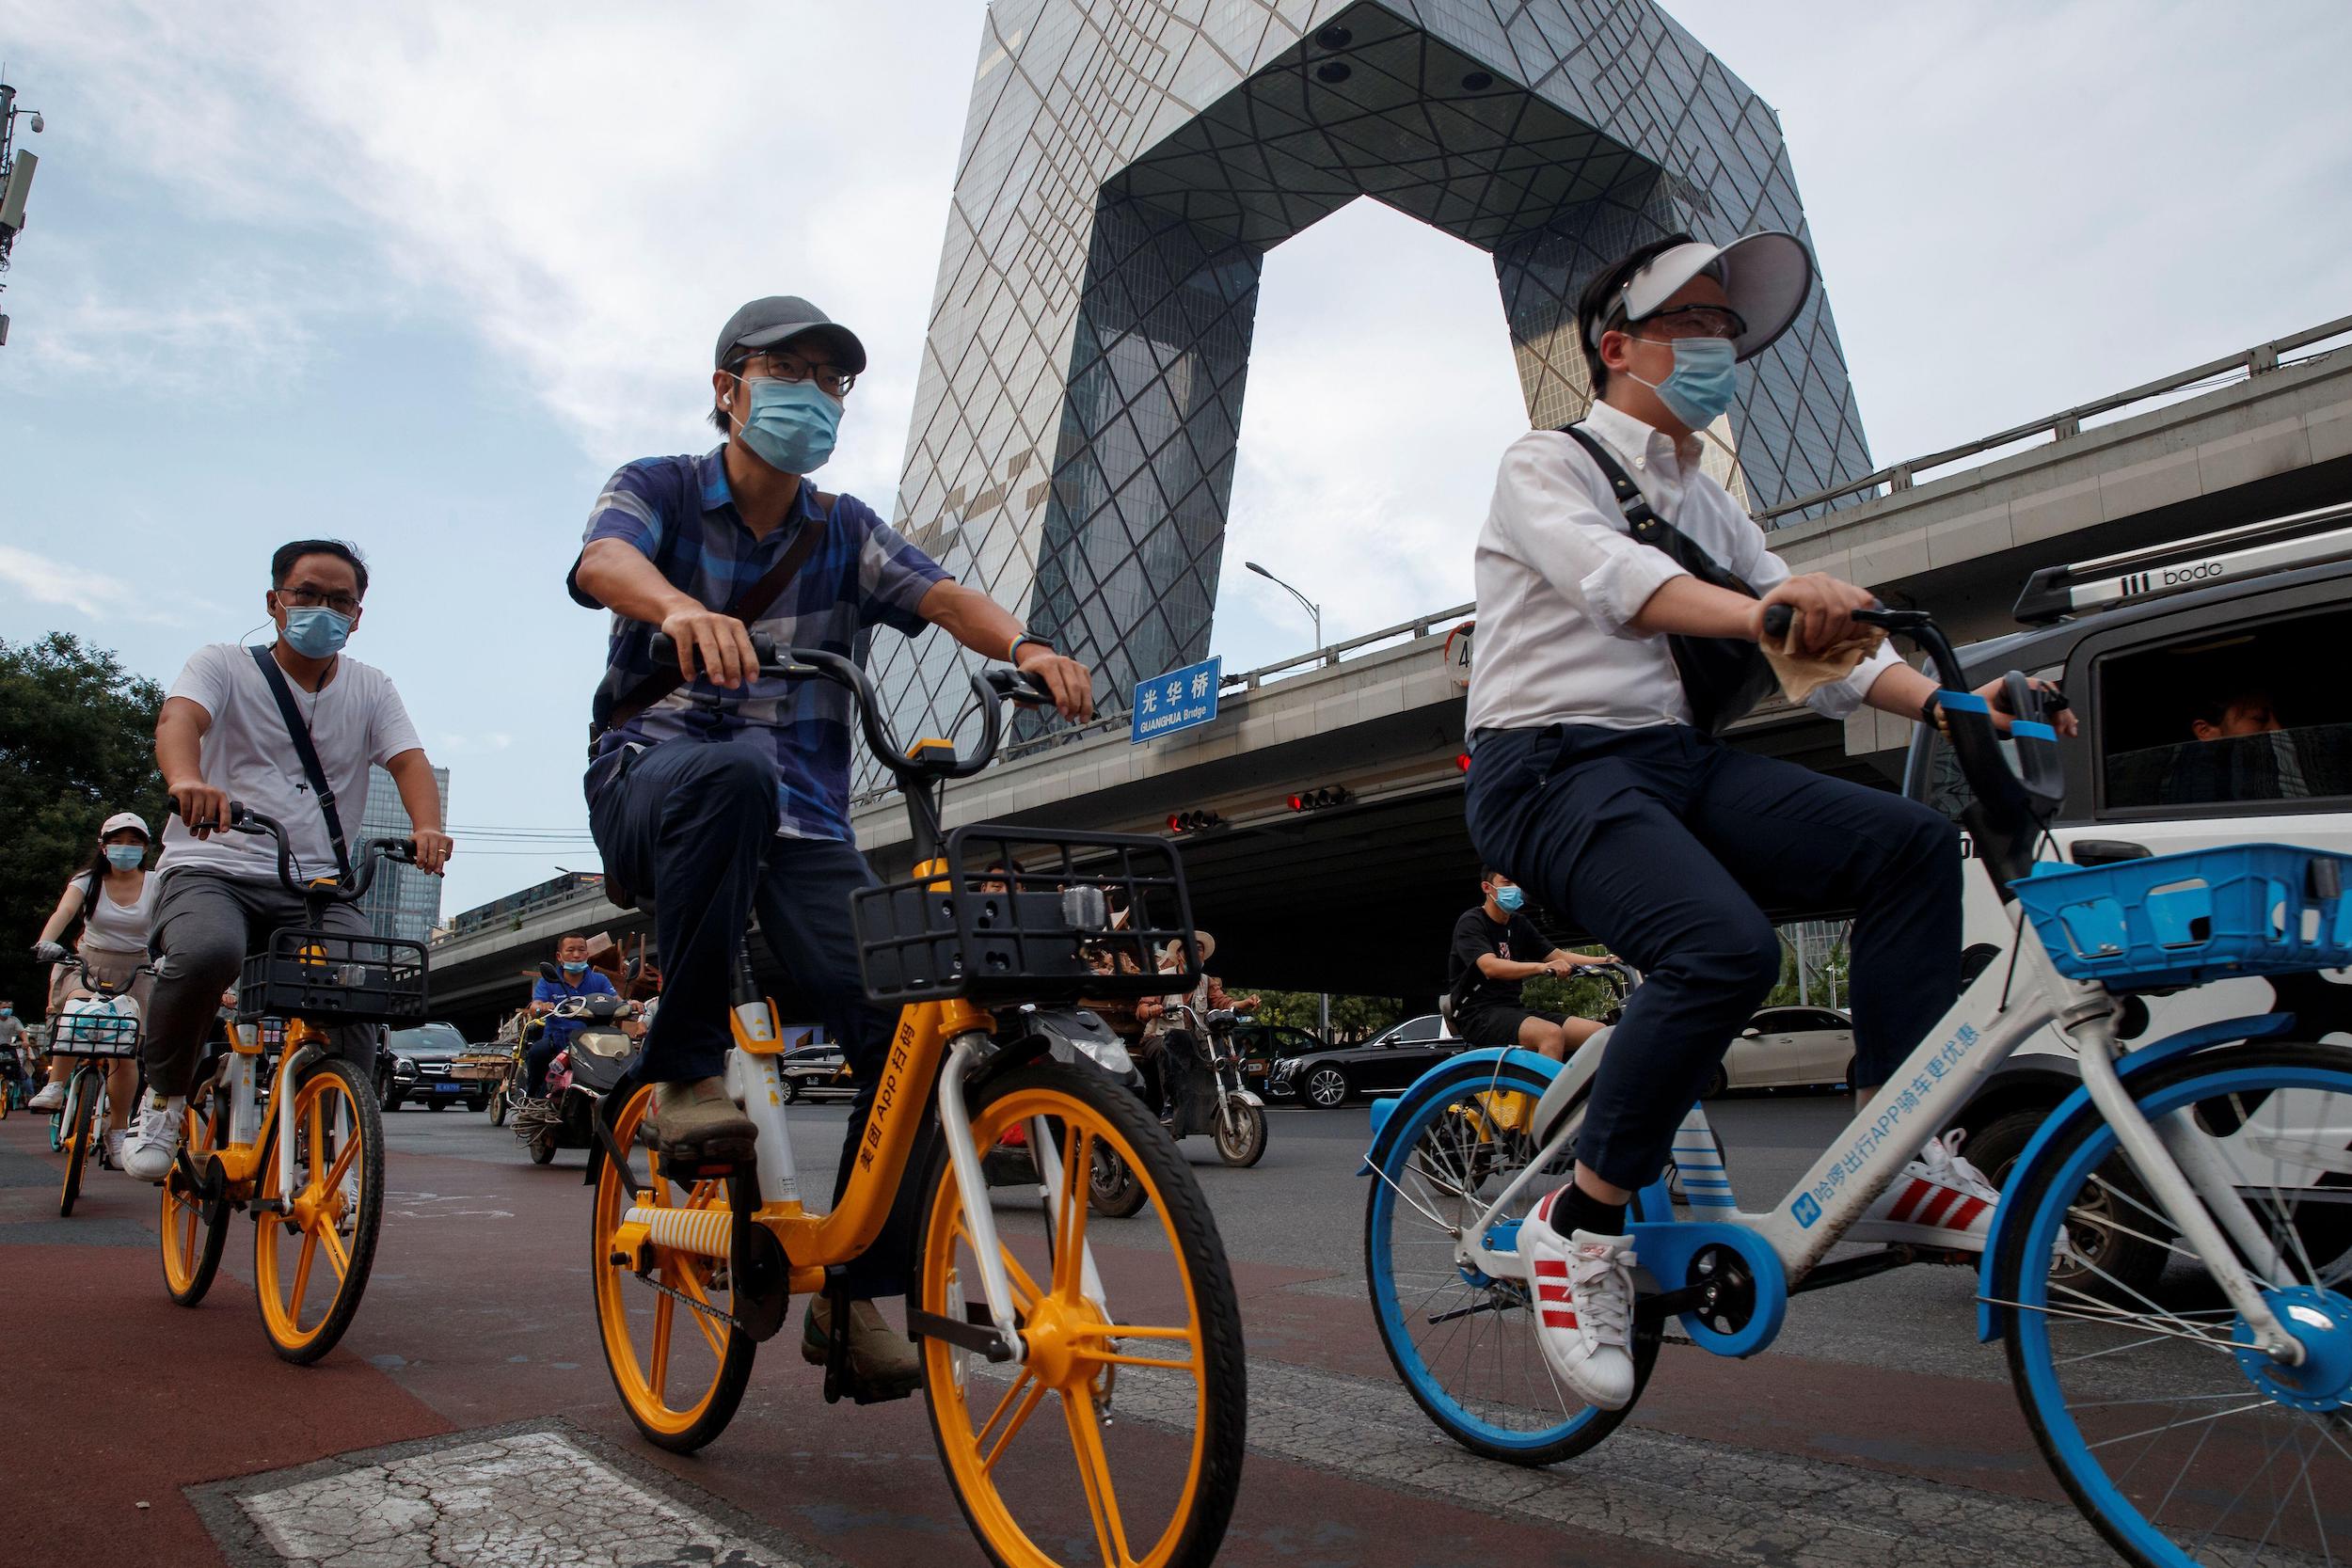 Ride-share cyclists in Beijing this August (Image: Alamy)